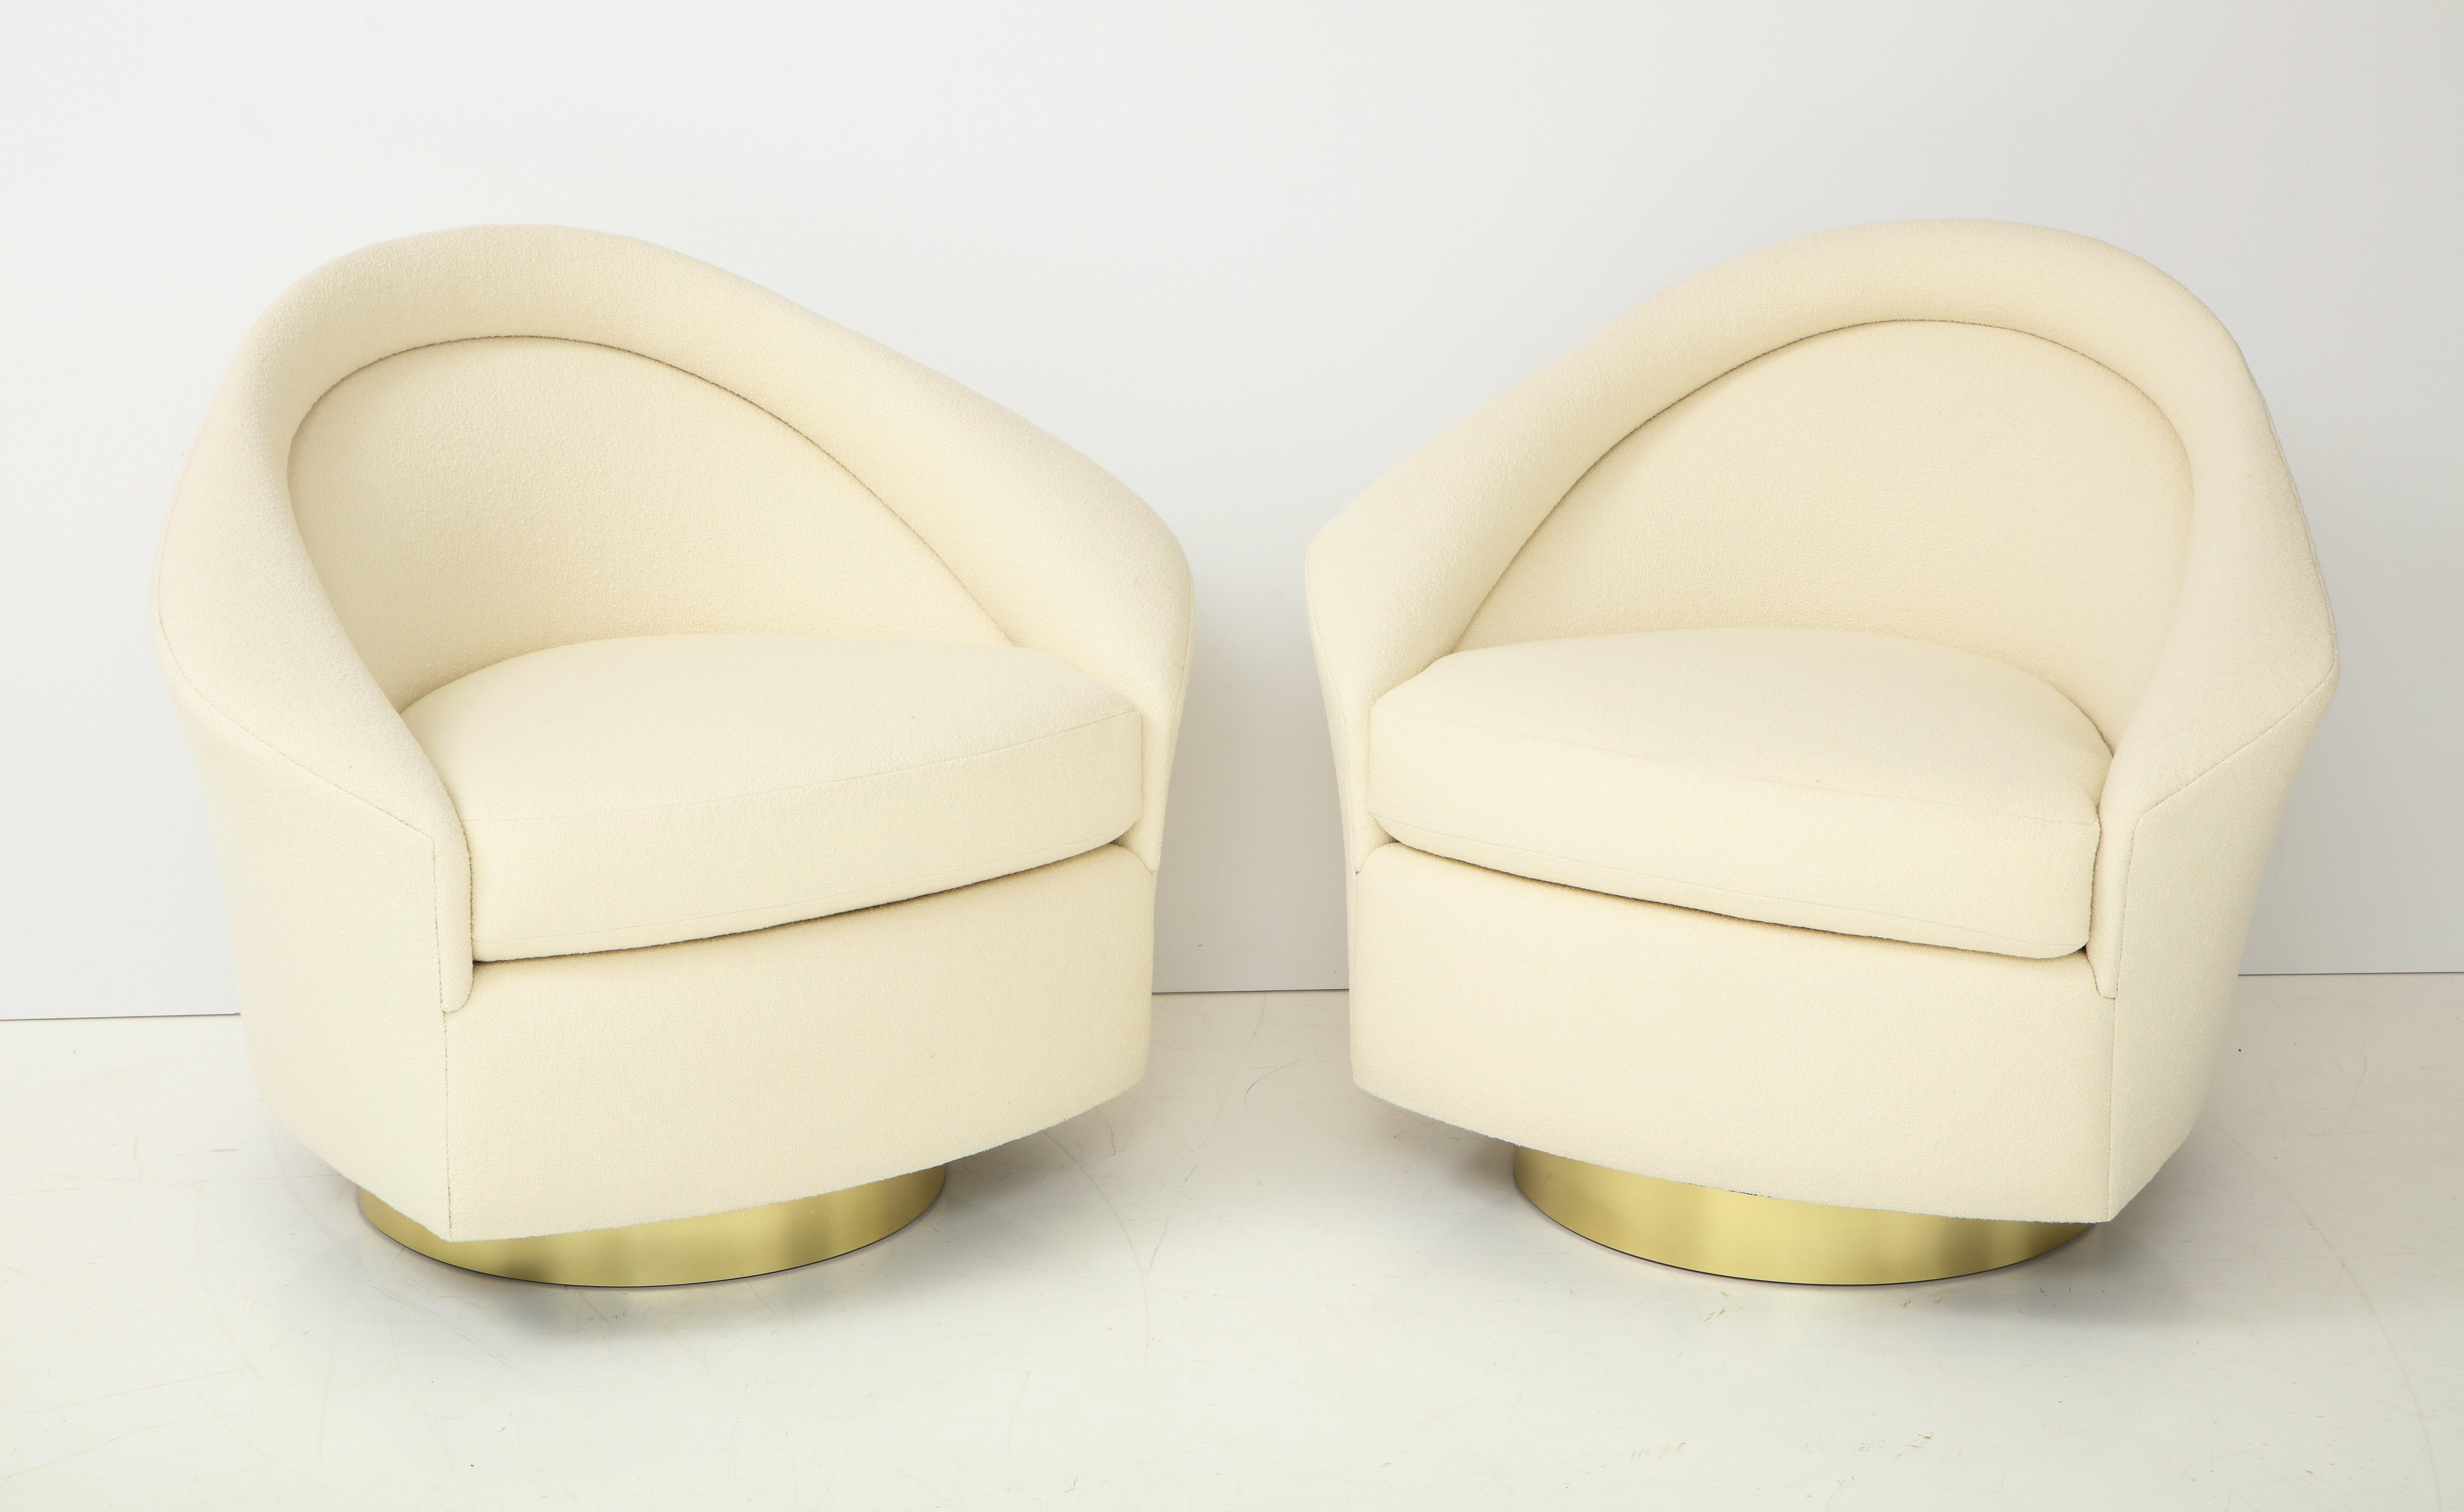 Stunning pair of Milo Baughman swivel chairs.
The chairs have elegant lines with detailed arms, and they have been newly reupholstered in a beautiful Ivory Knoll bouclé fabric.
They are mounted on polished brass trim swivel bases.